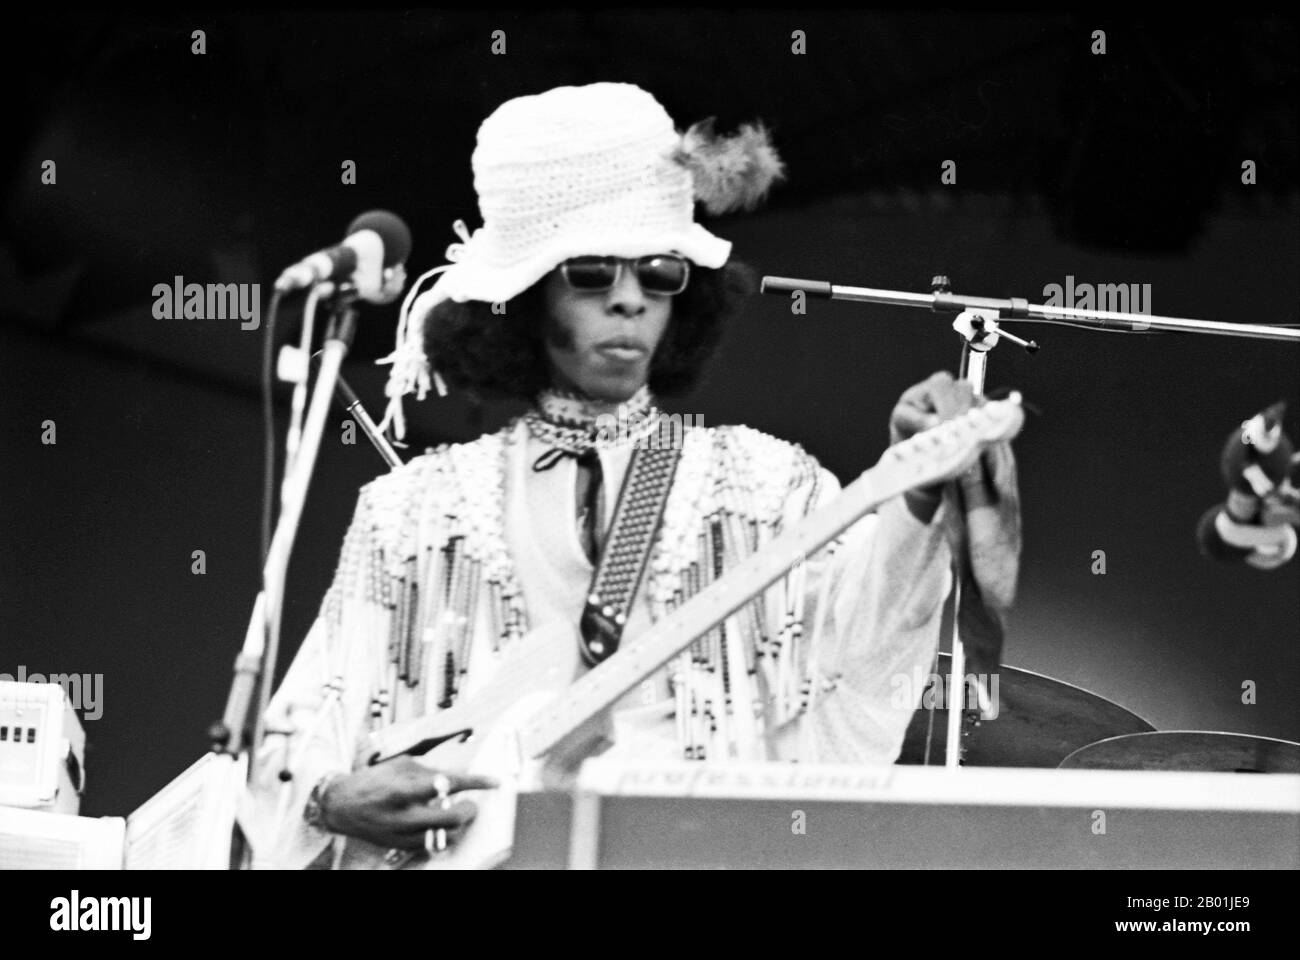 the-group-sly-and-the-family-stone-during-the-famous-isle-of-wight-festival-in-1970-it-is-estimated-that-between-600-and-700000-people-attended-saturday-29-august-1970-2B01JE9.jpg